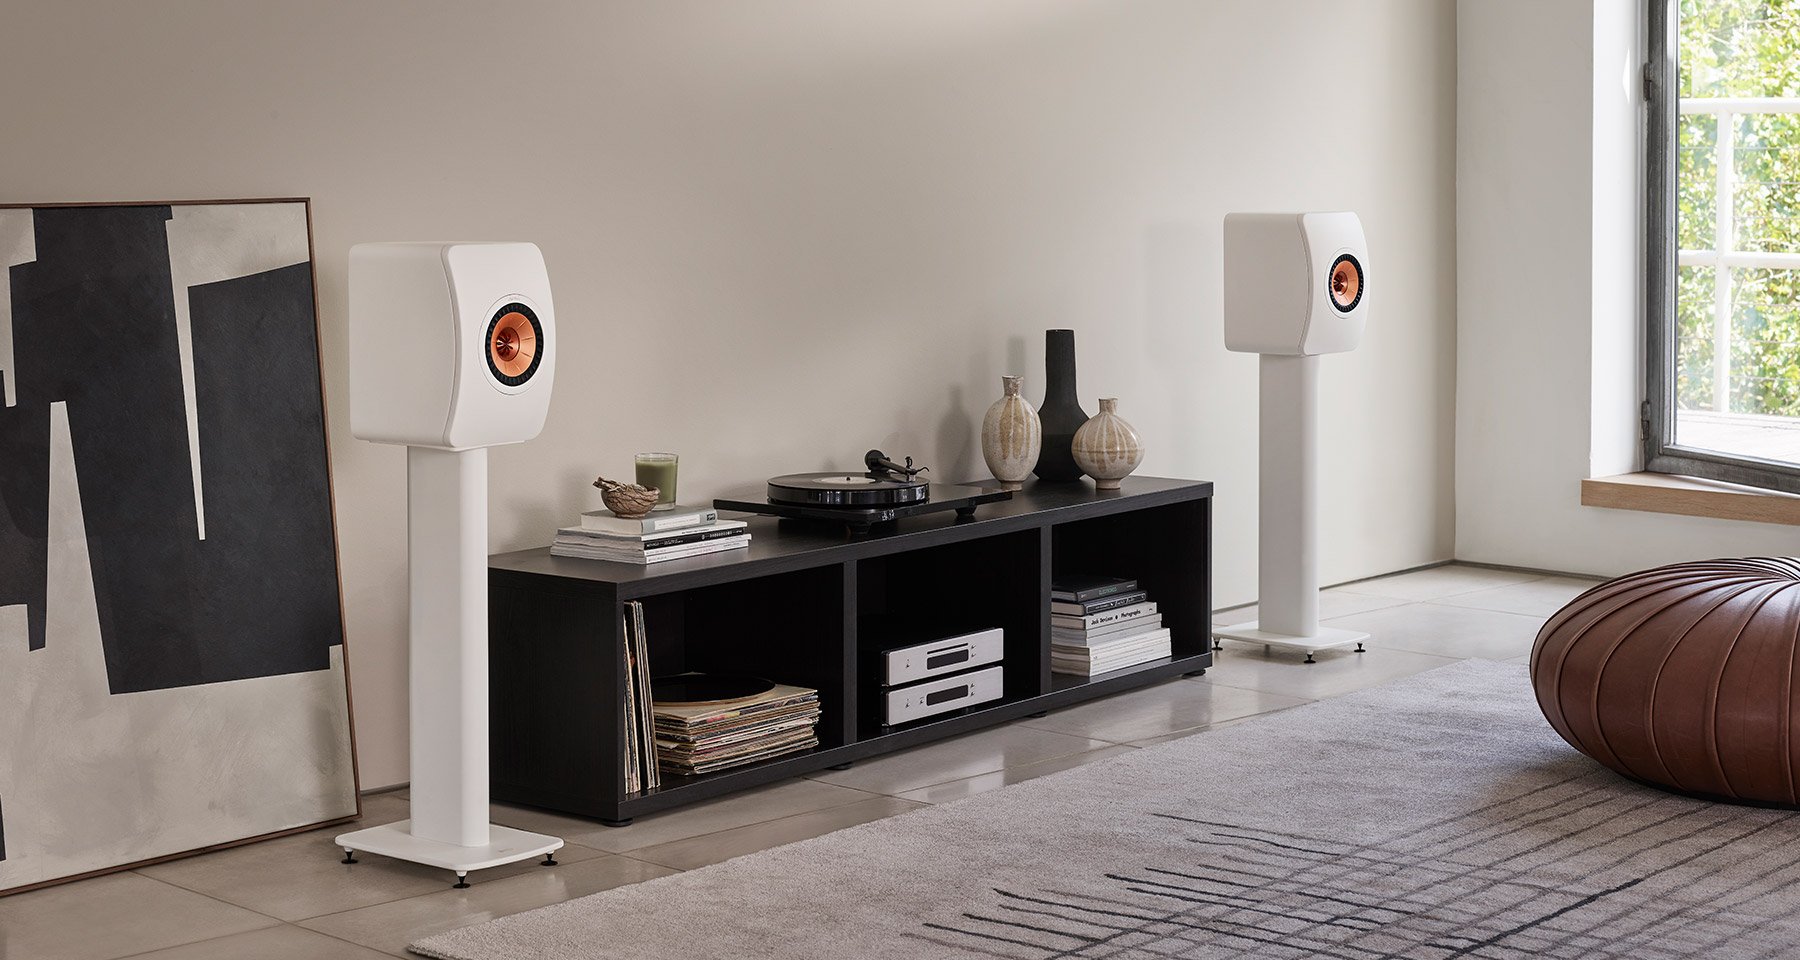 White LS50 Meta Bookshelf speakers on stands connected to turntable